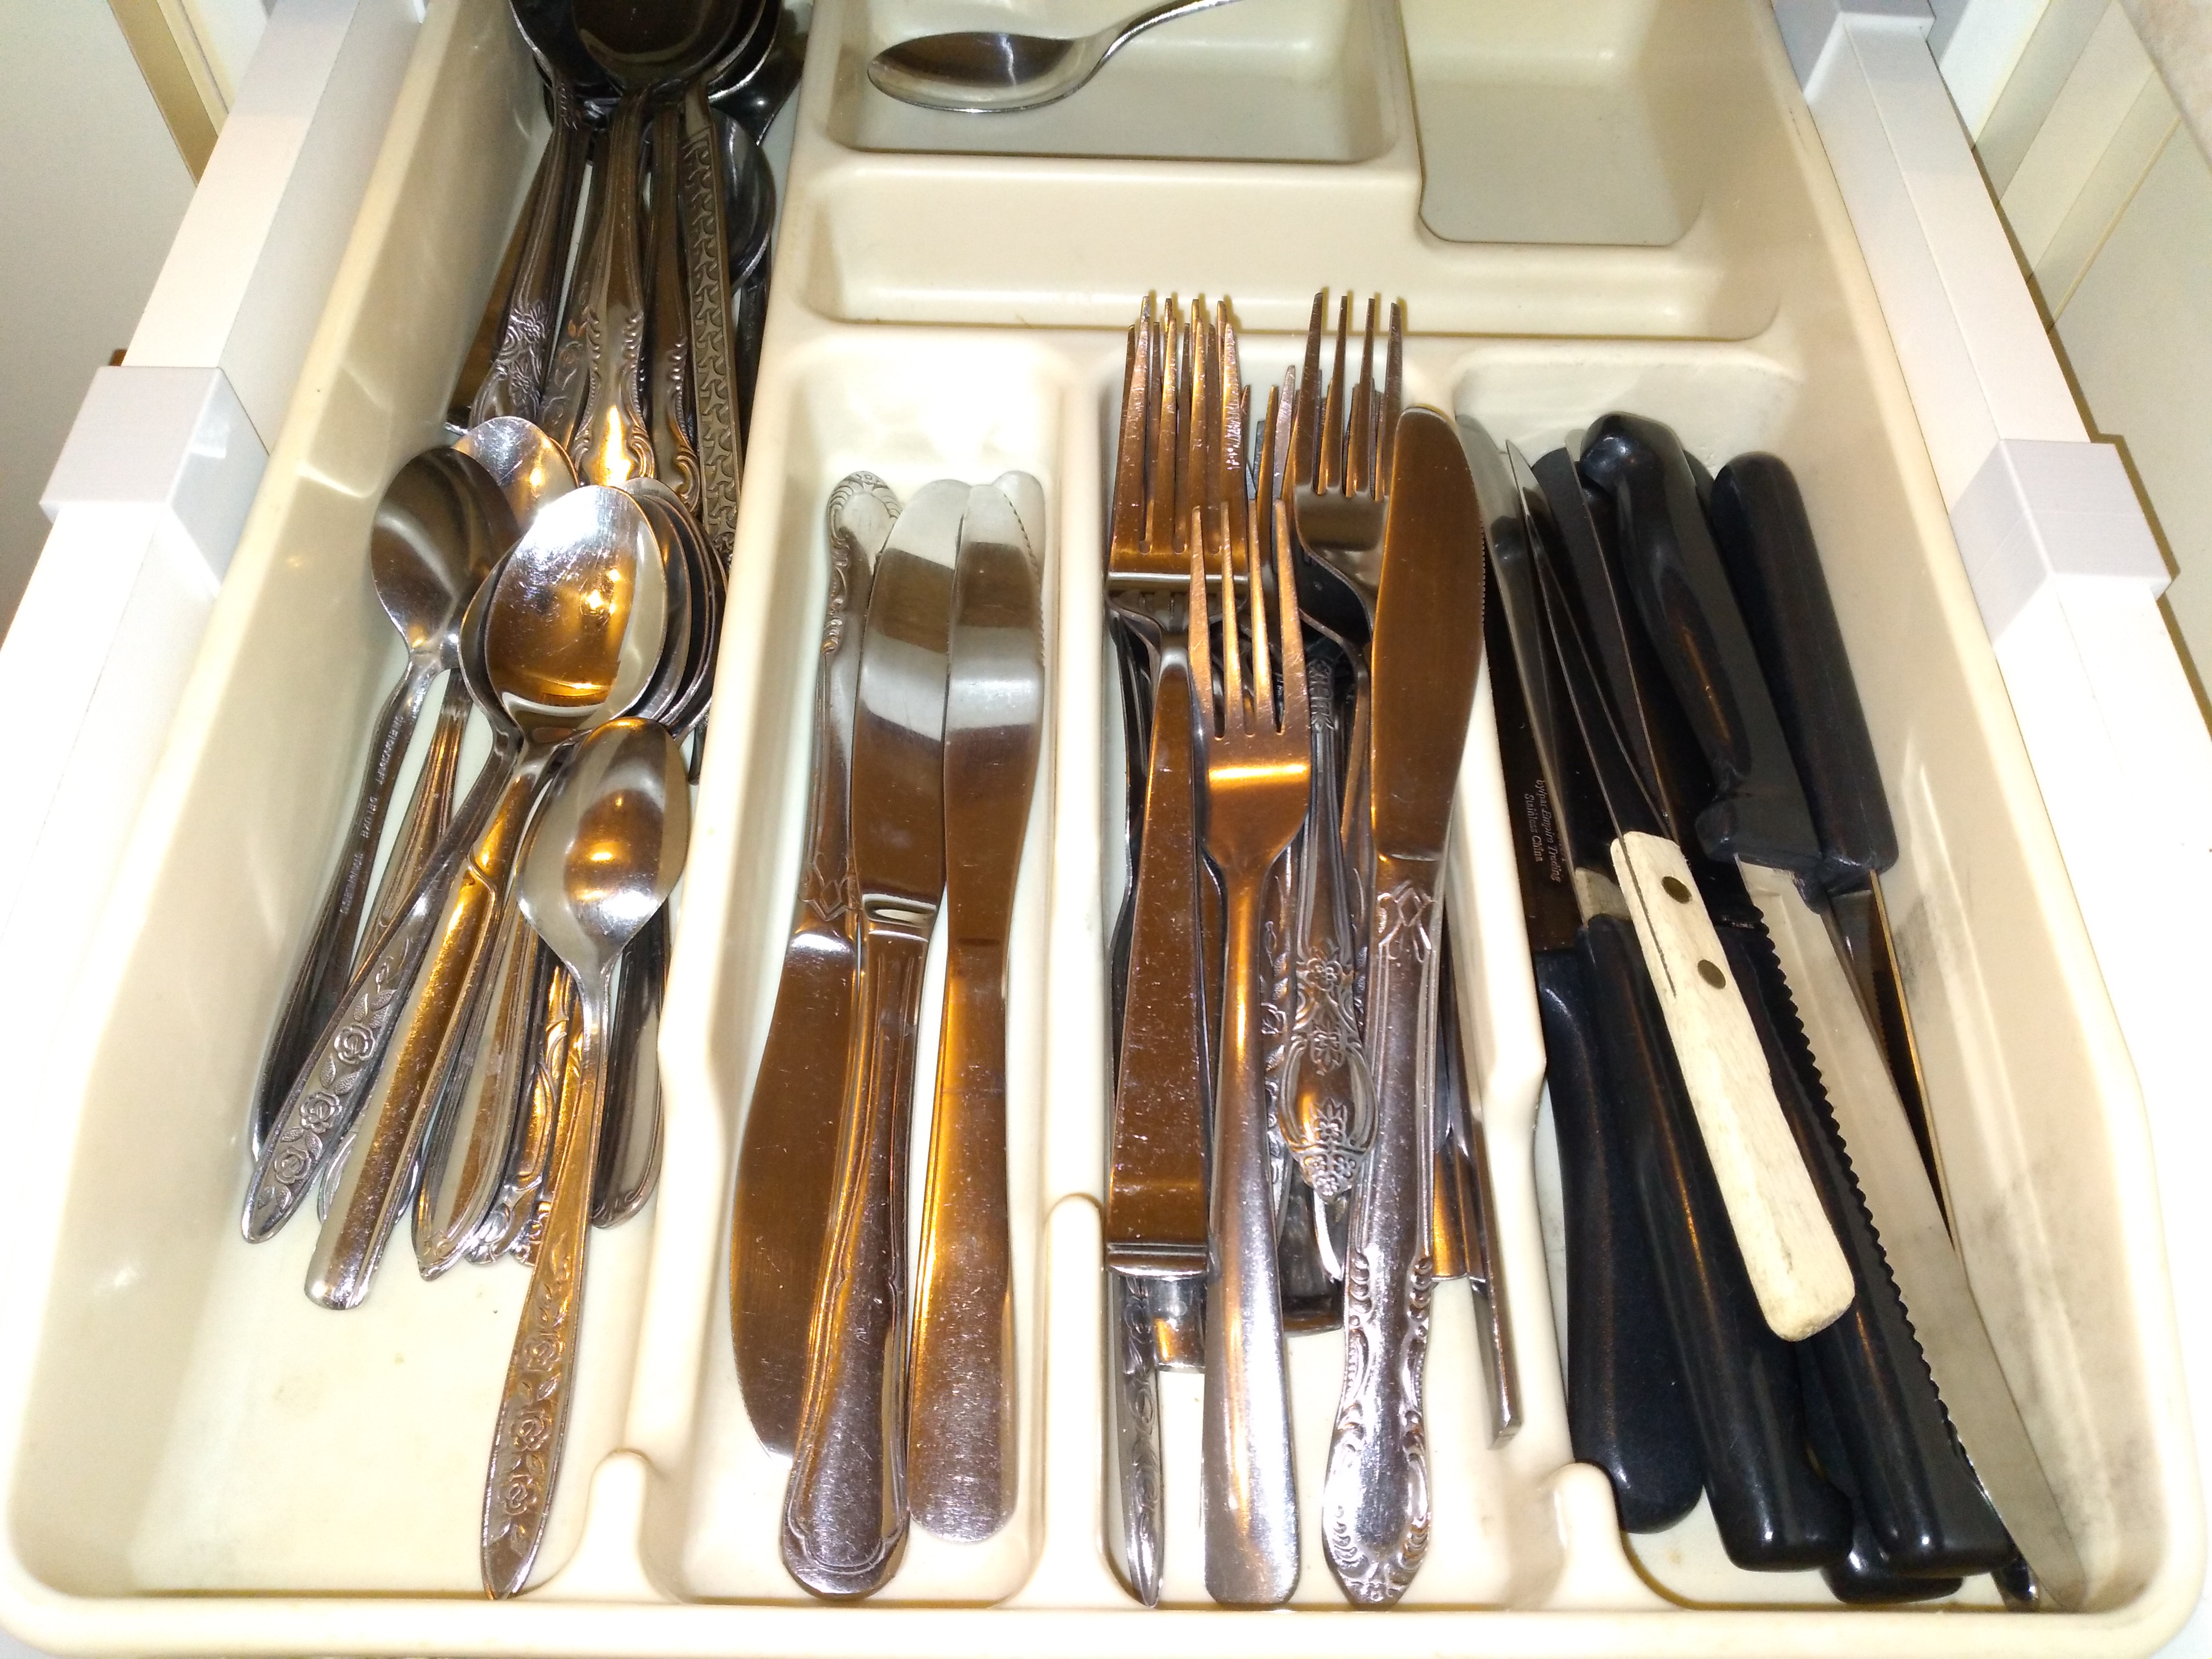 Hook to hold kitchen utensil tray in the drawer